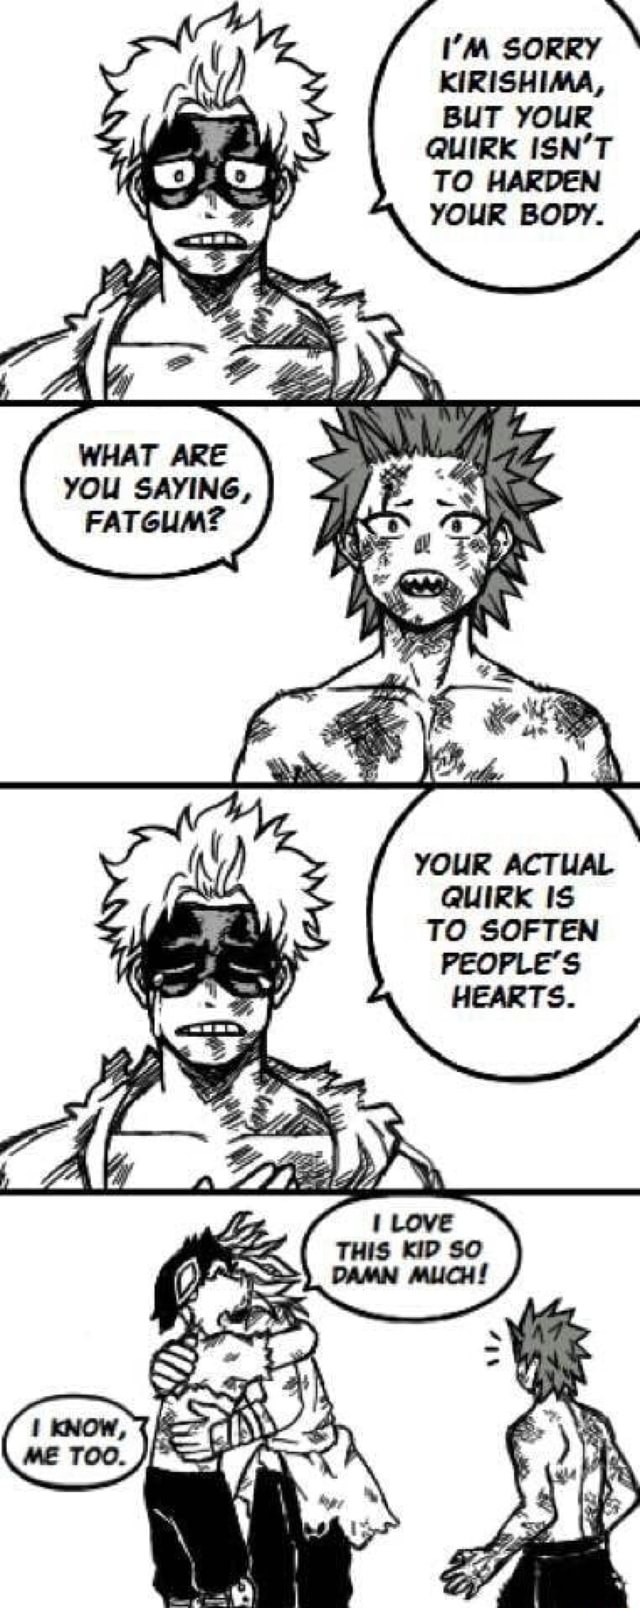 What is fatgums quirk